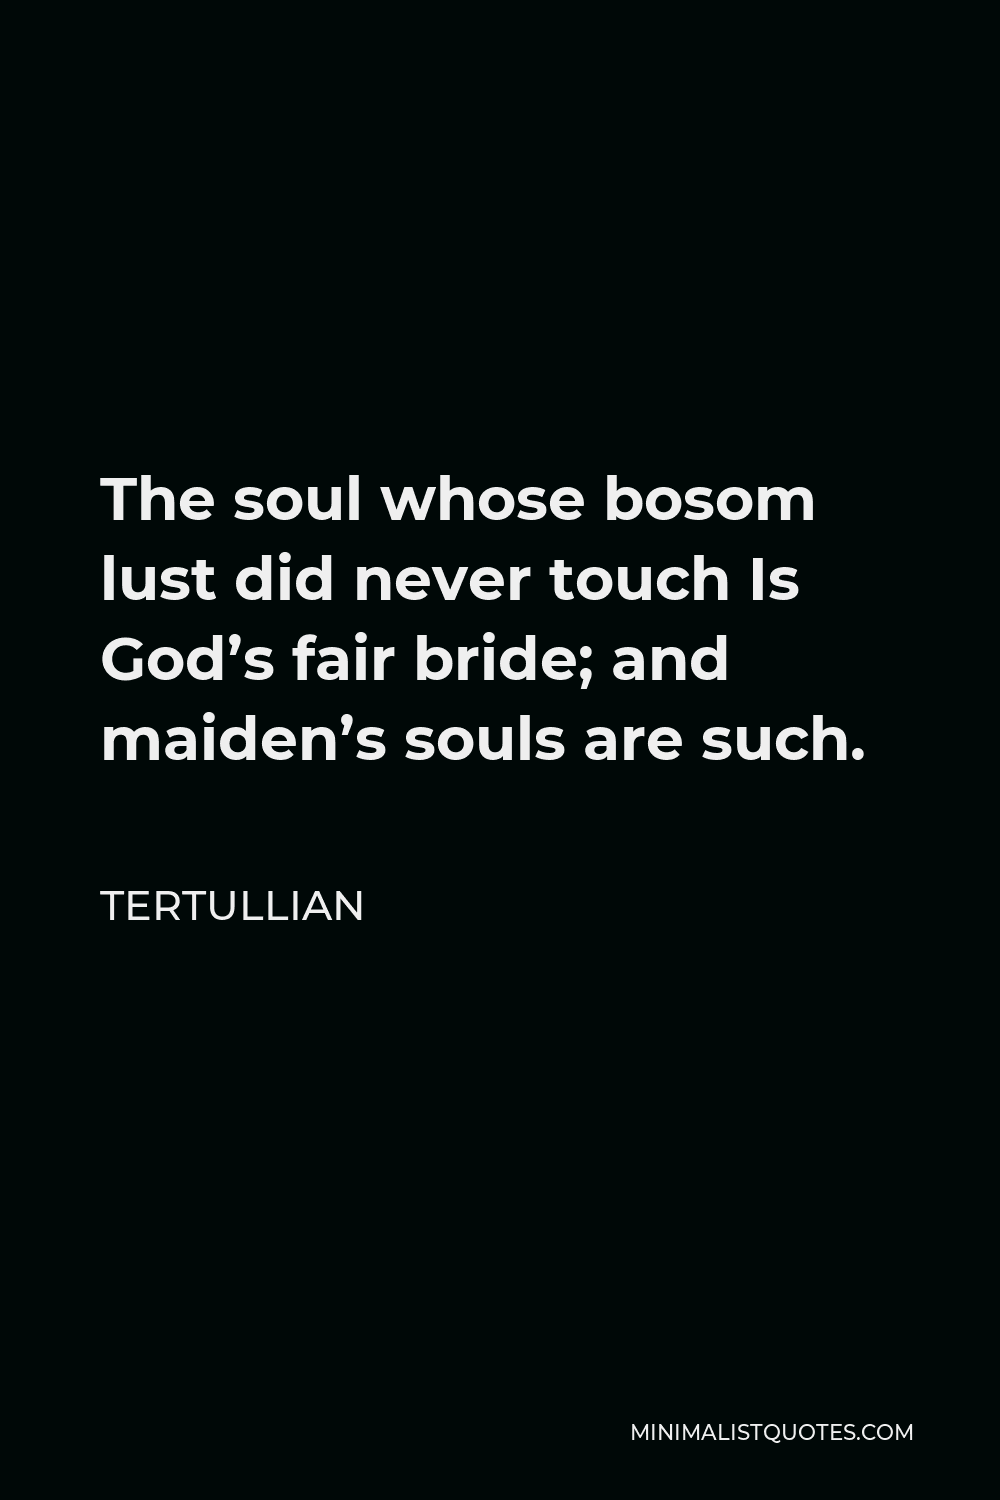 Tertullian Quote - The soul whose bosom lust did never touch Is God’s fair bride; and maiden’s souls are such.